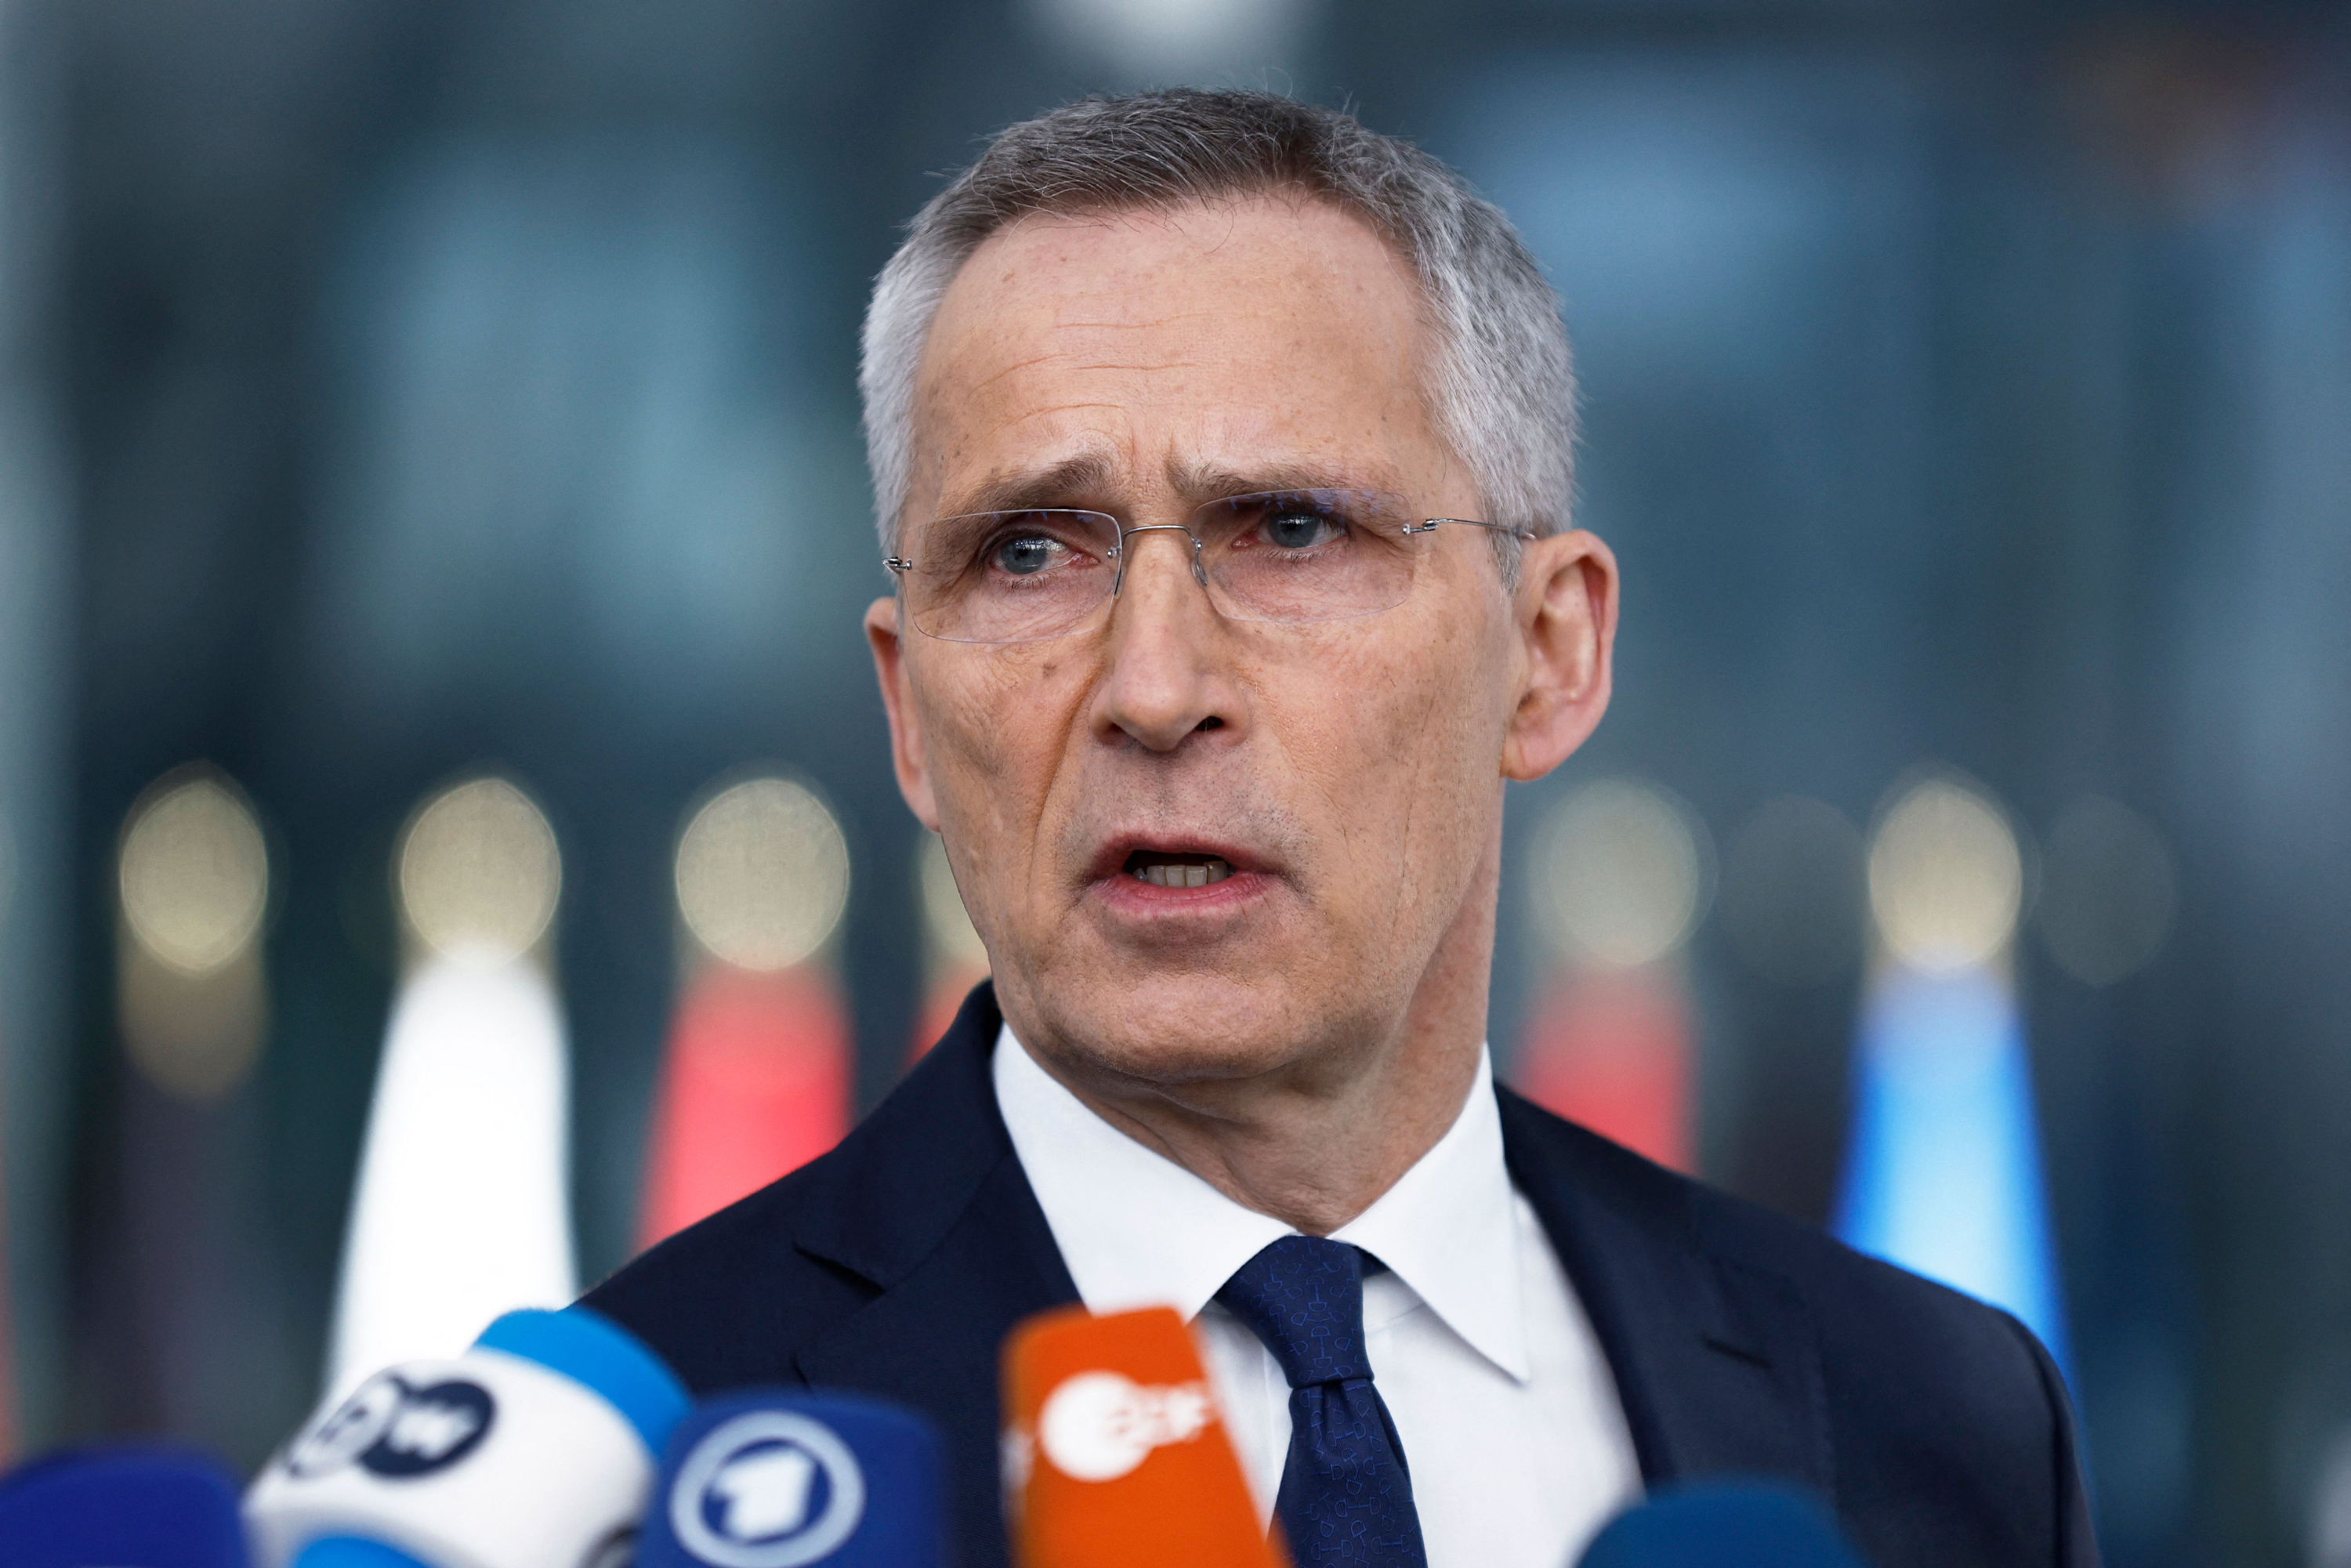 Jens Stoltenberg speaks to the press ahead of a meeting at the NATO headquarters in Brussels, on April 4.